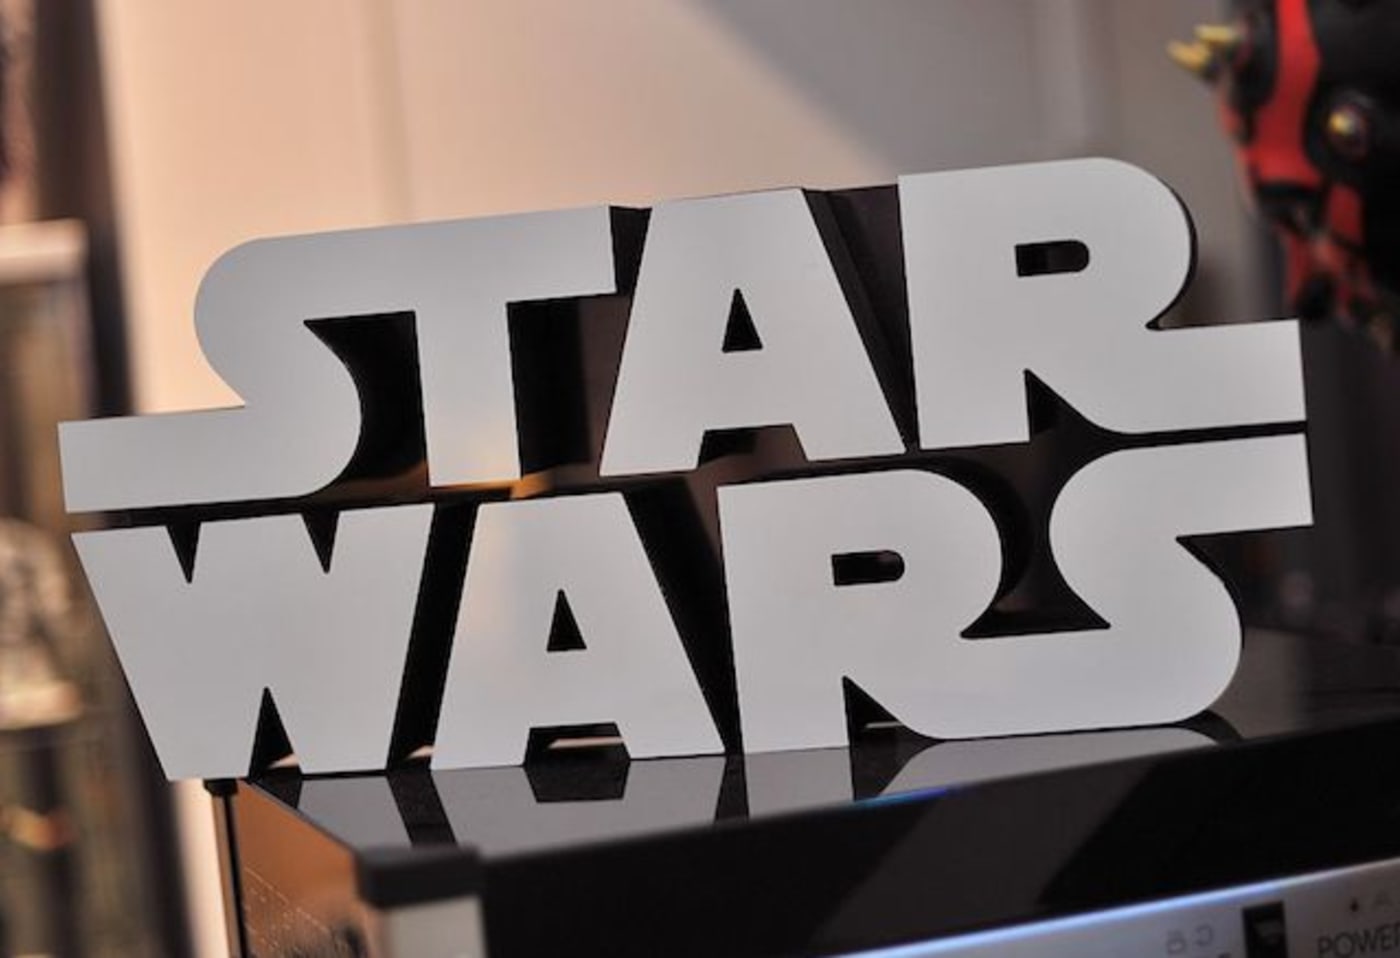 This is a picture of the Star Wars logo.